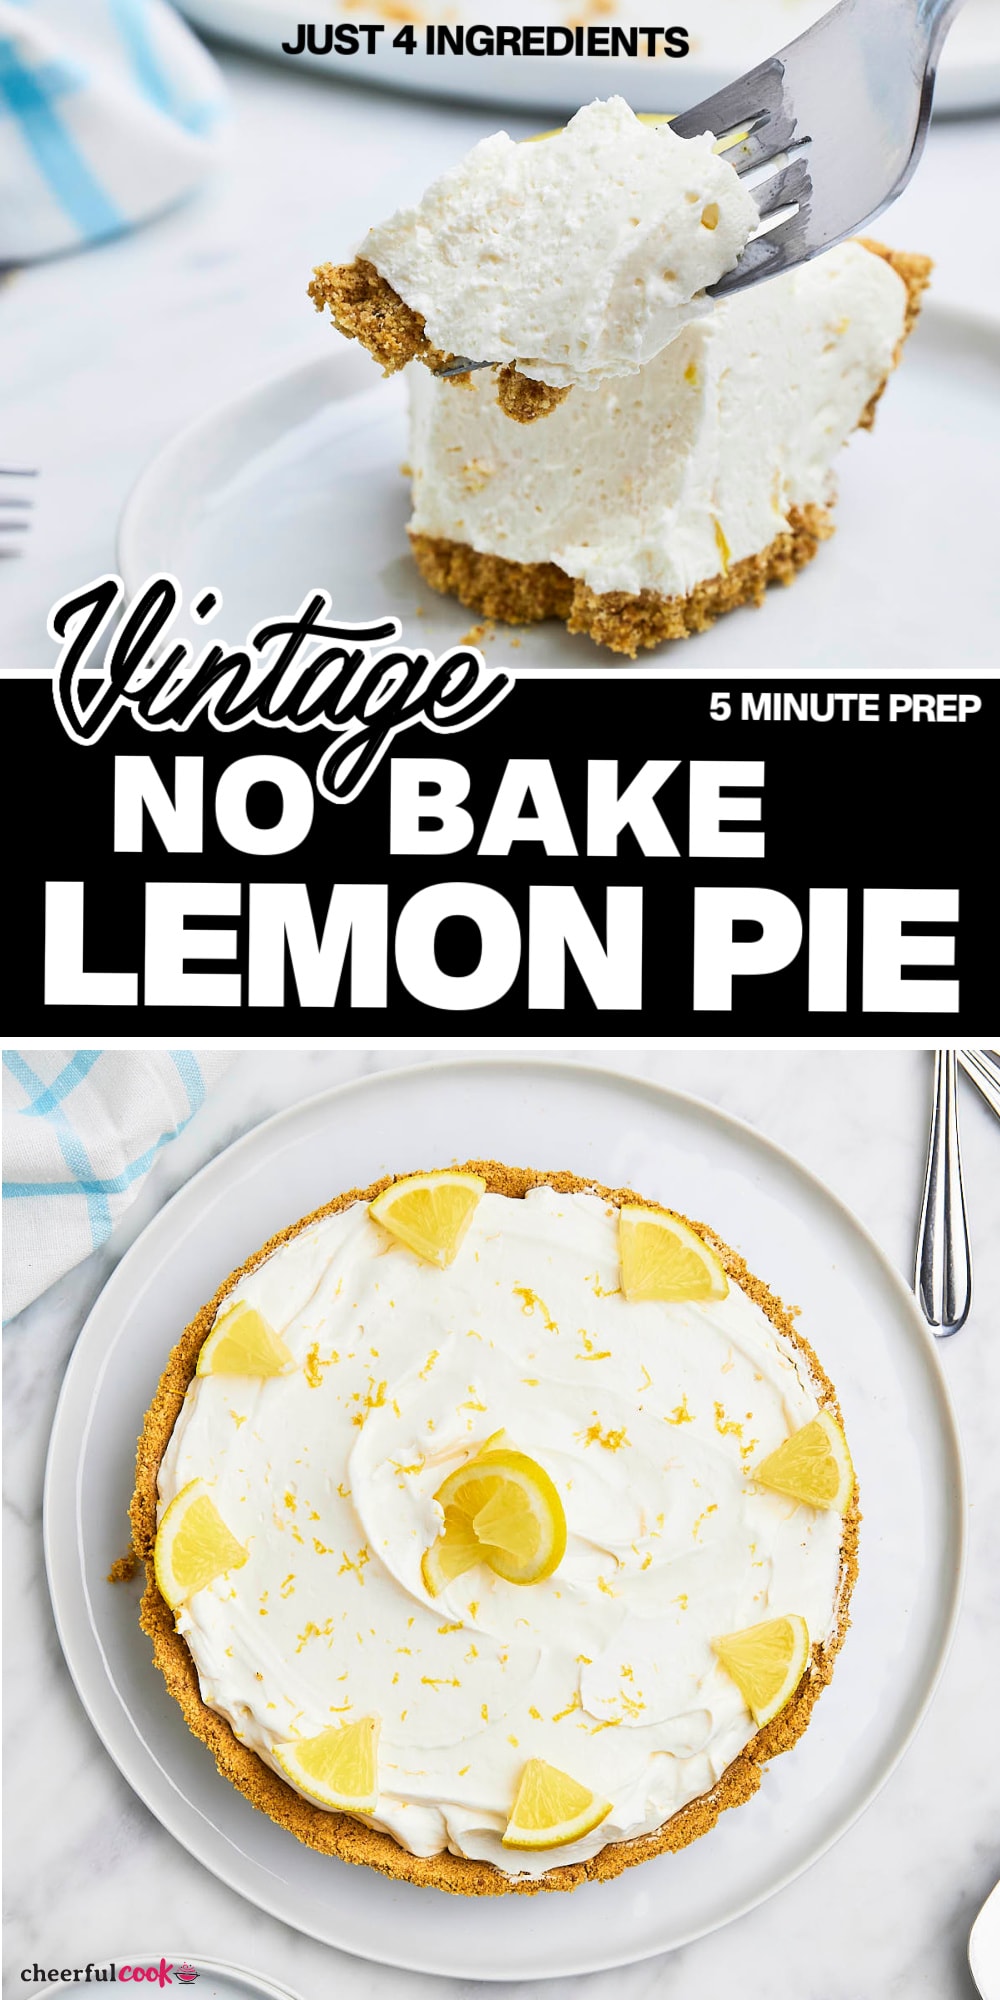 Treat yourself to a slice of heaven with Lemon Icebox Pie! 🍋 🥧 This refreshing, no-bake dessert features a tangy and smooth filling with a buttery graham cracker crust, making it the perfect sweet treat for any occasion. #cheerfulcook #lemonpie #lemoniceboxpie #nobakelemonpie #nobake #nobakedessert #dessert via @cheerfulcook